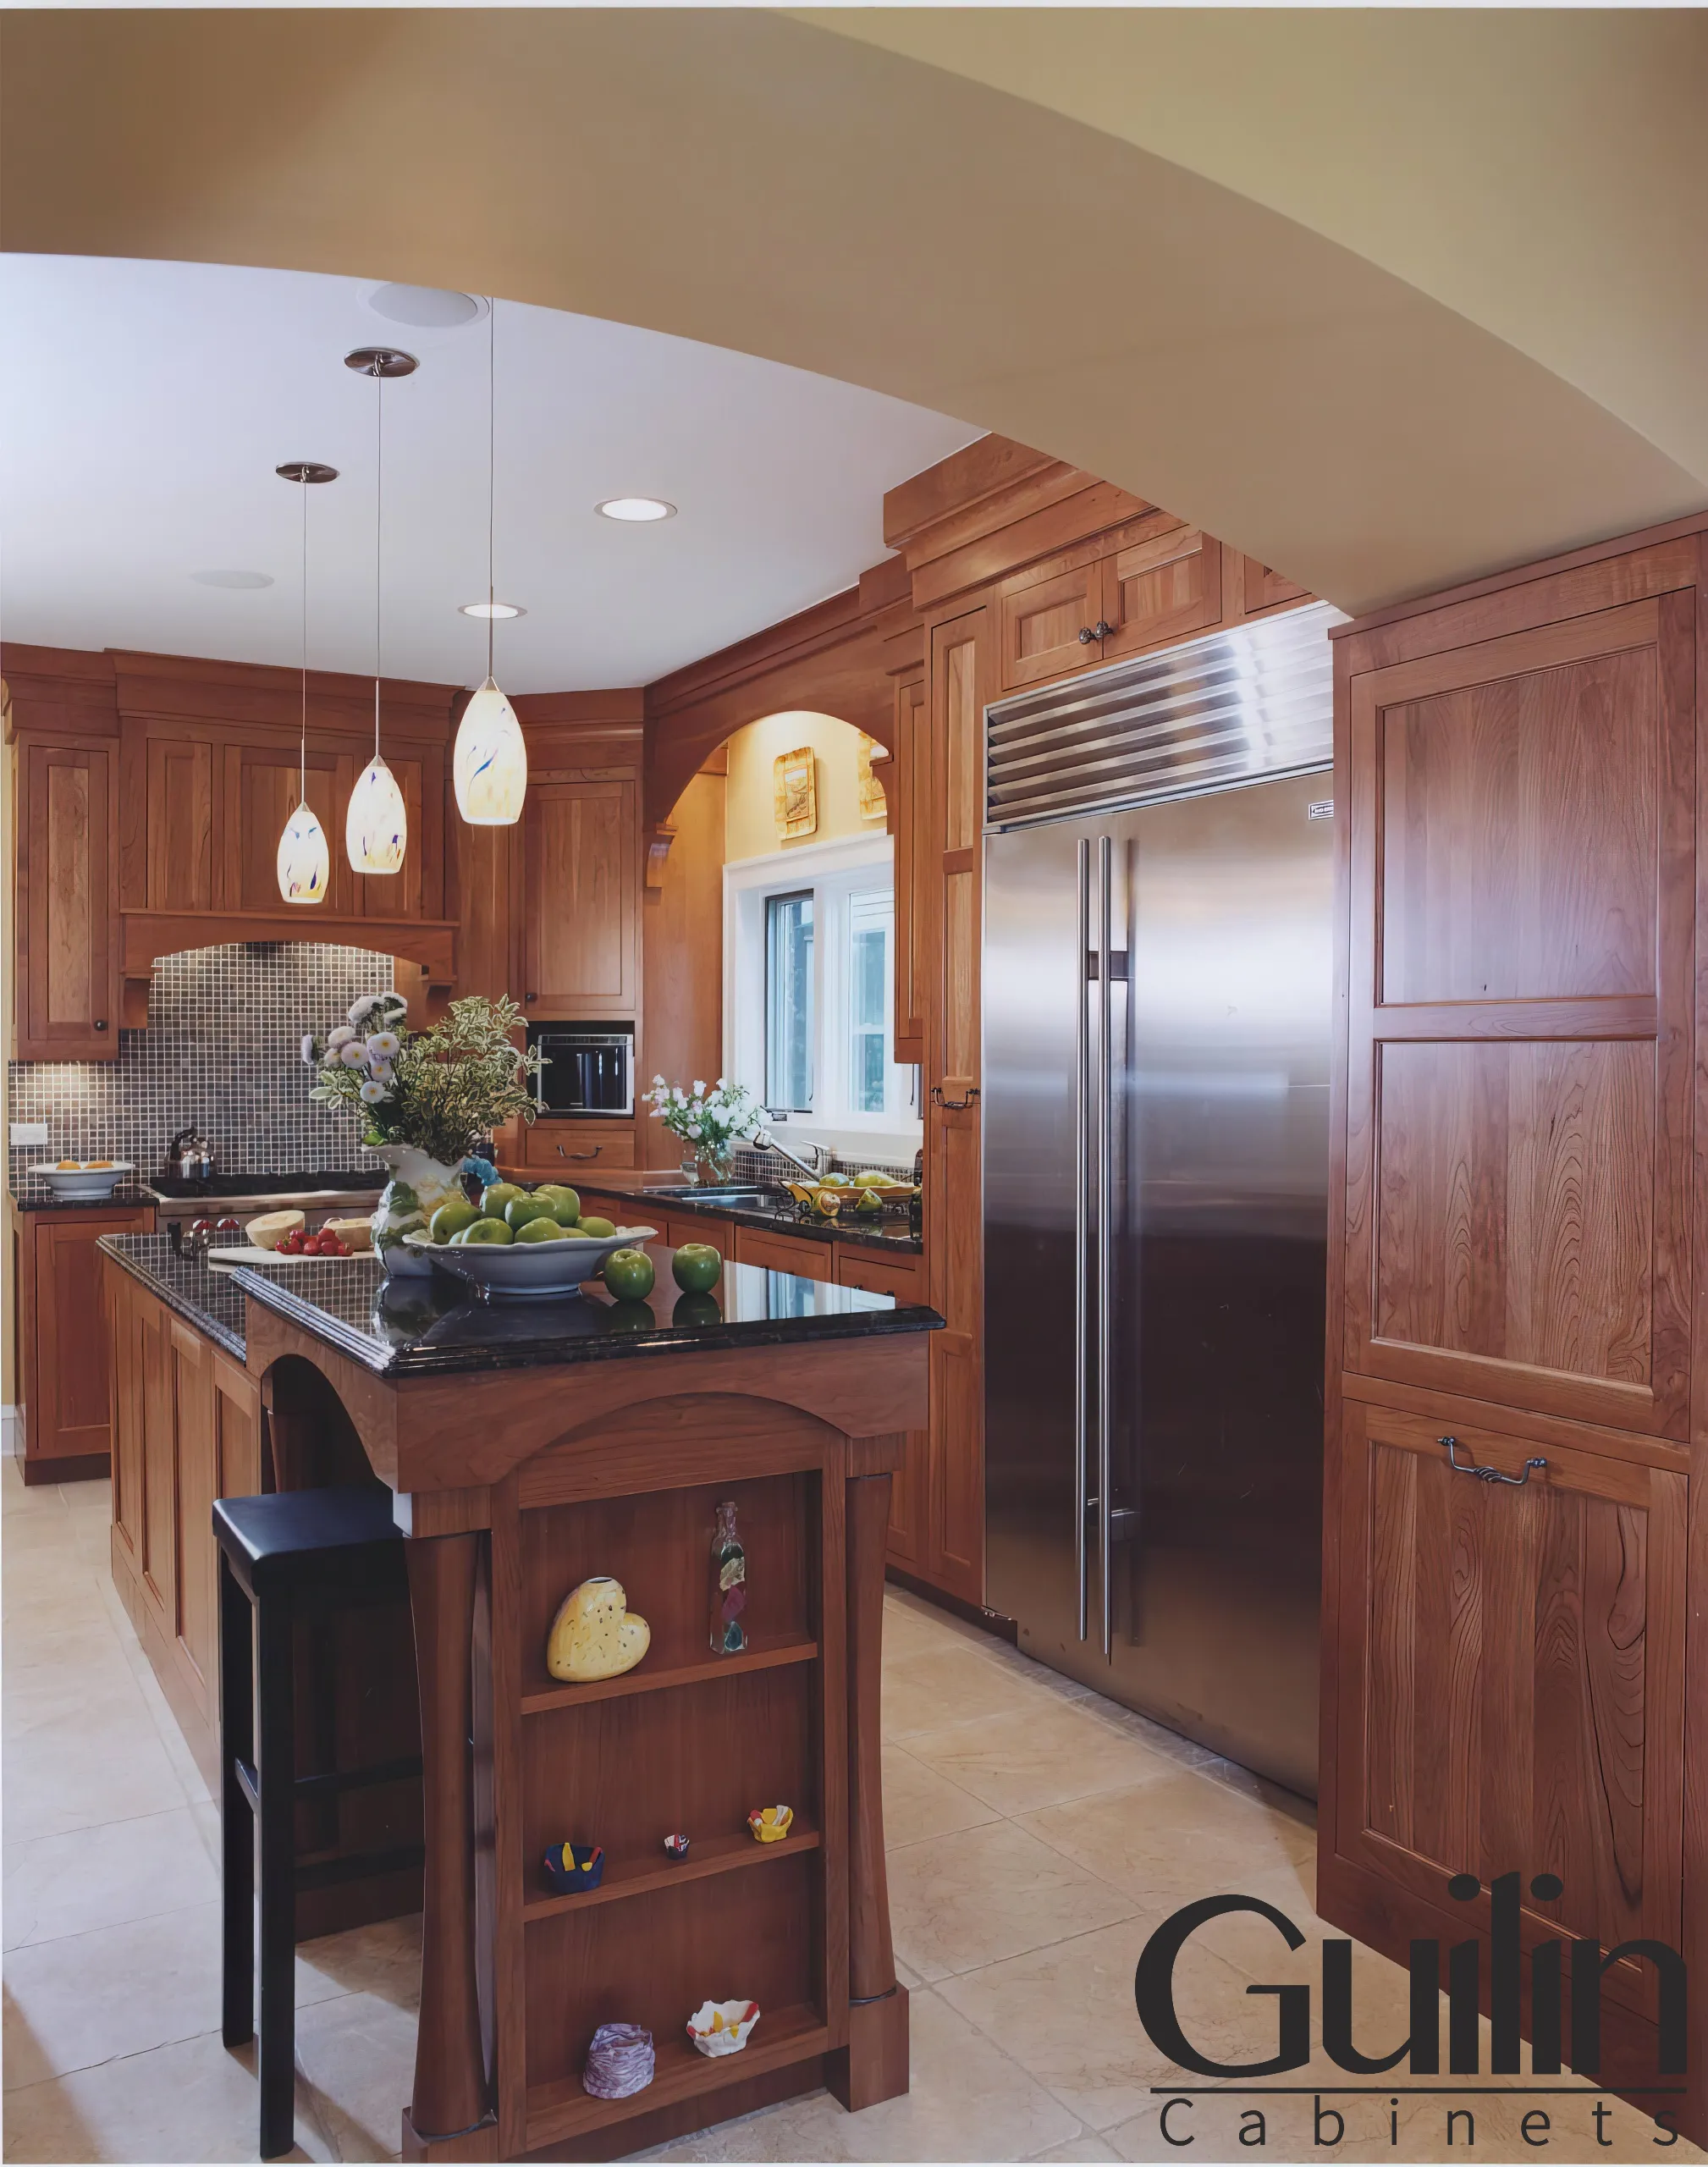 Natural solid wood cabinets have long been the gold standard for kitchens